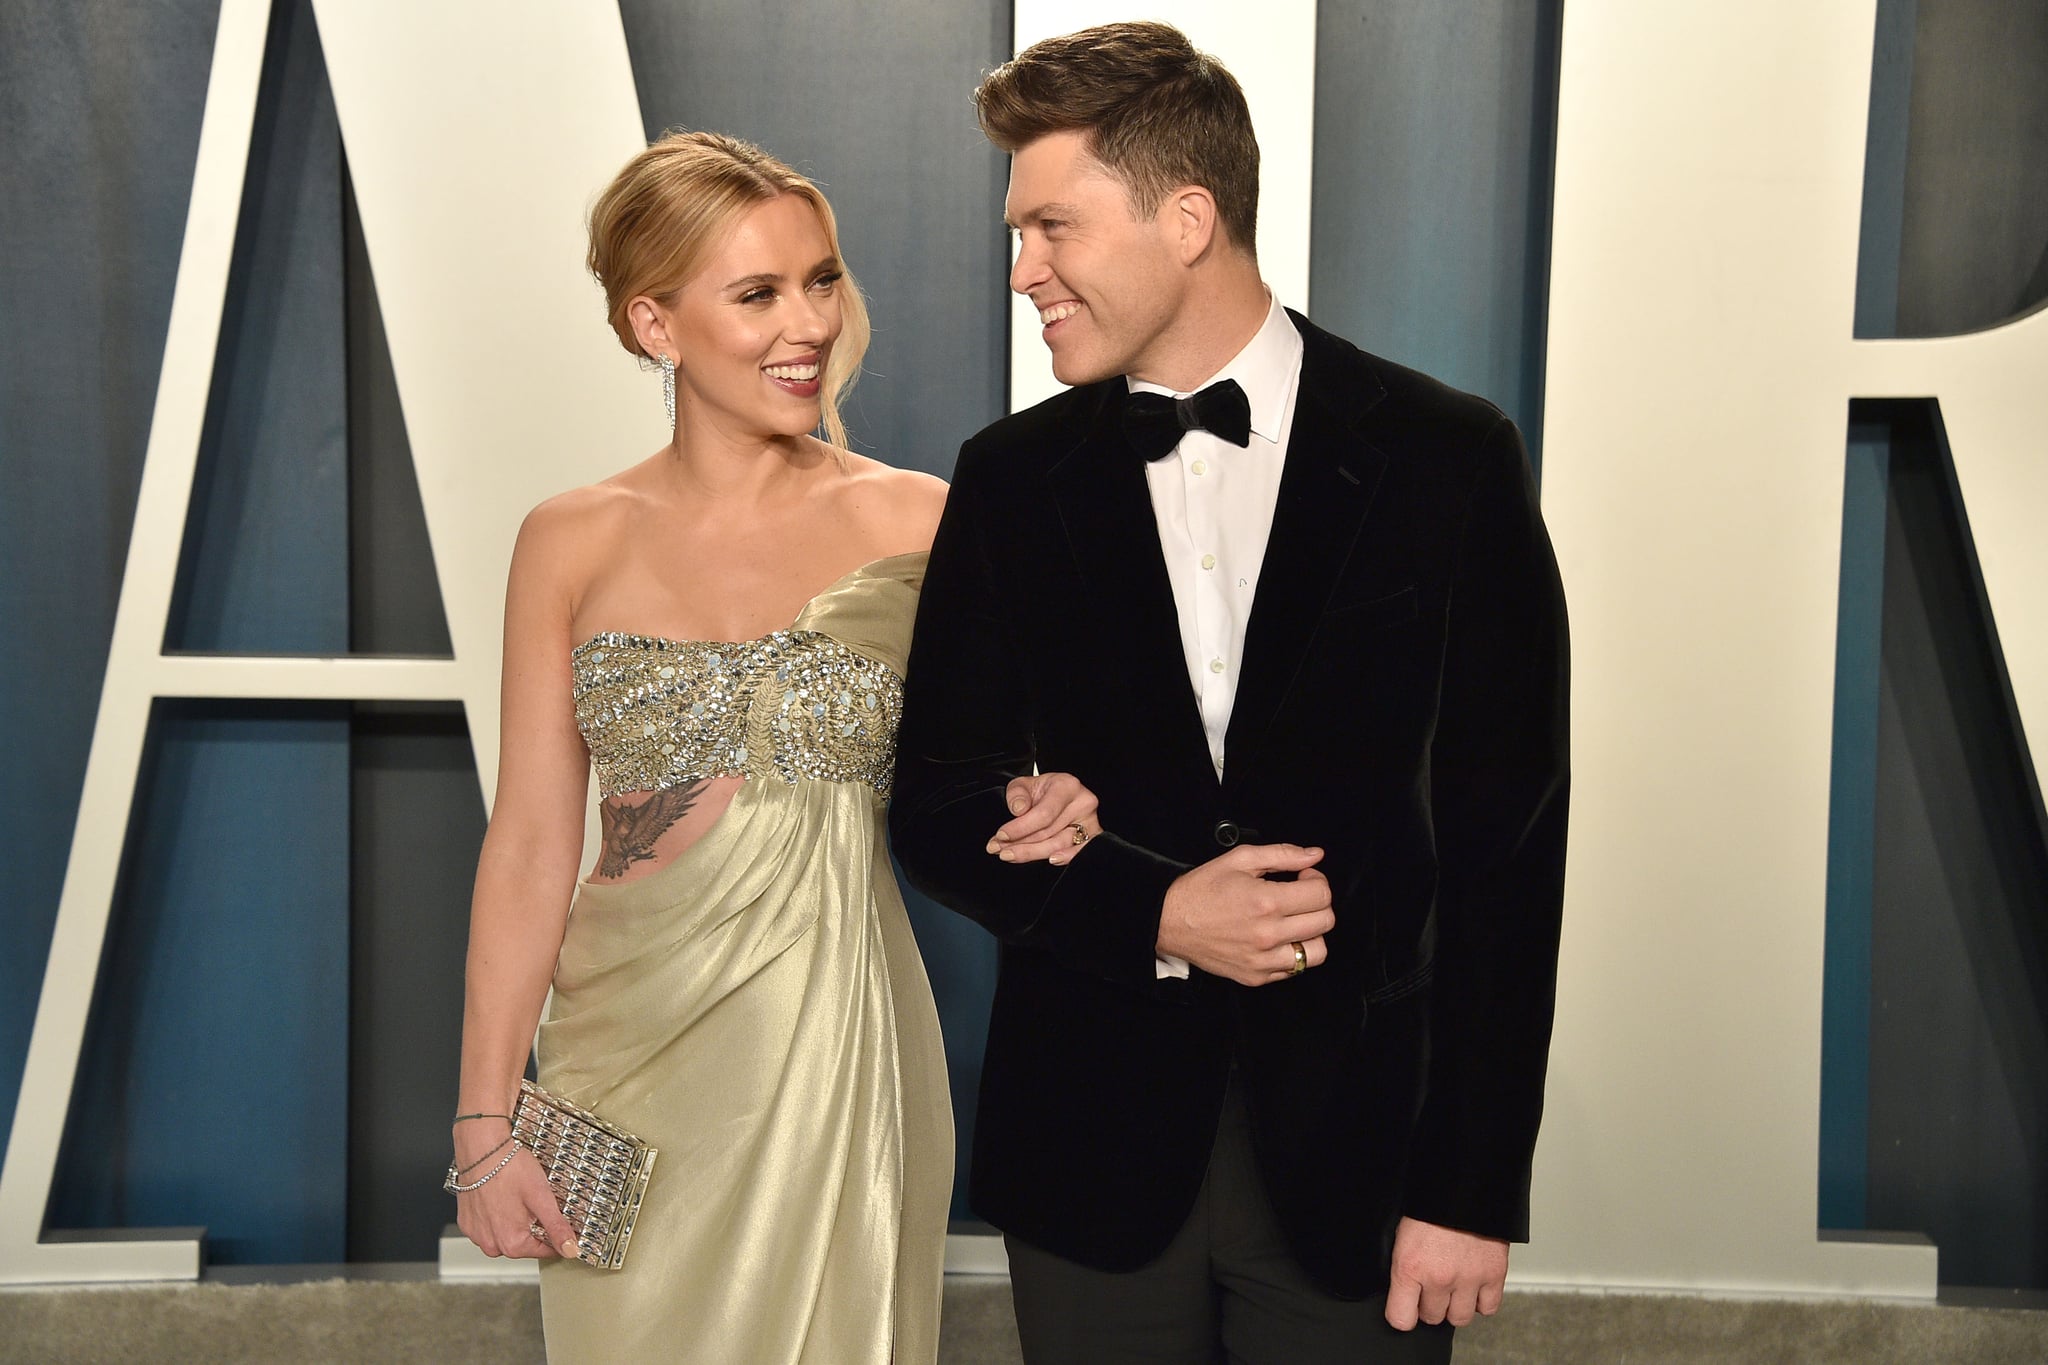 BEVERLY HILLS, CALIFORNIA - FEBRUARY 09: Scarlett Johansson and Colin Jost attend the 2020 Vanity Fair Oscar Party at Wallis Annenberg Center for the Performing Arts on February 09, 2020 in Beverly Hills, California. (Photo by David Crotty/Patrick McMullan via Getty Images)